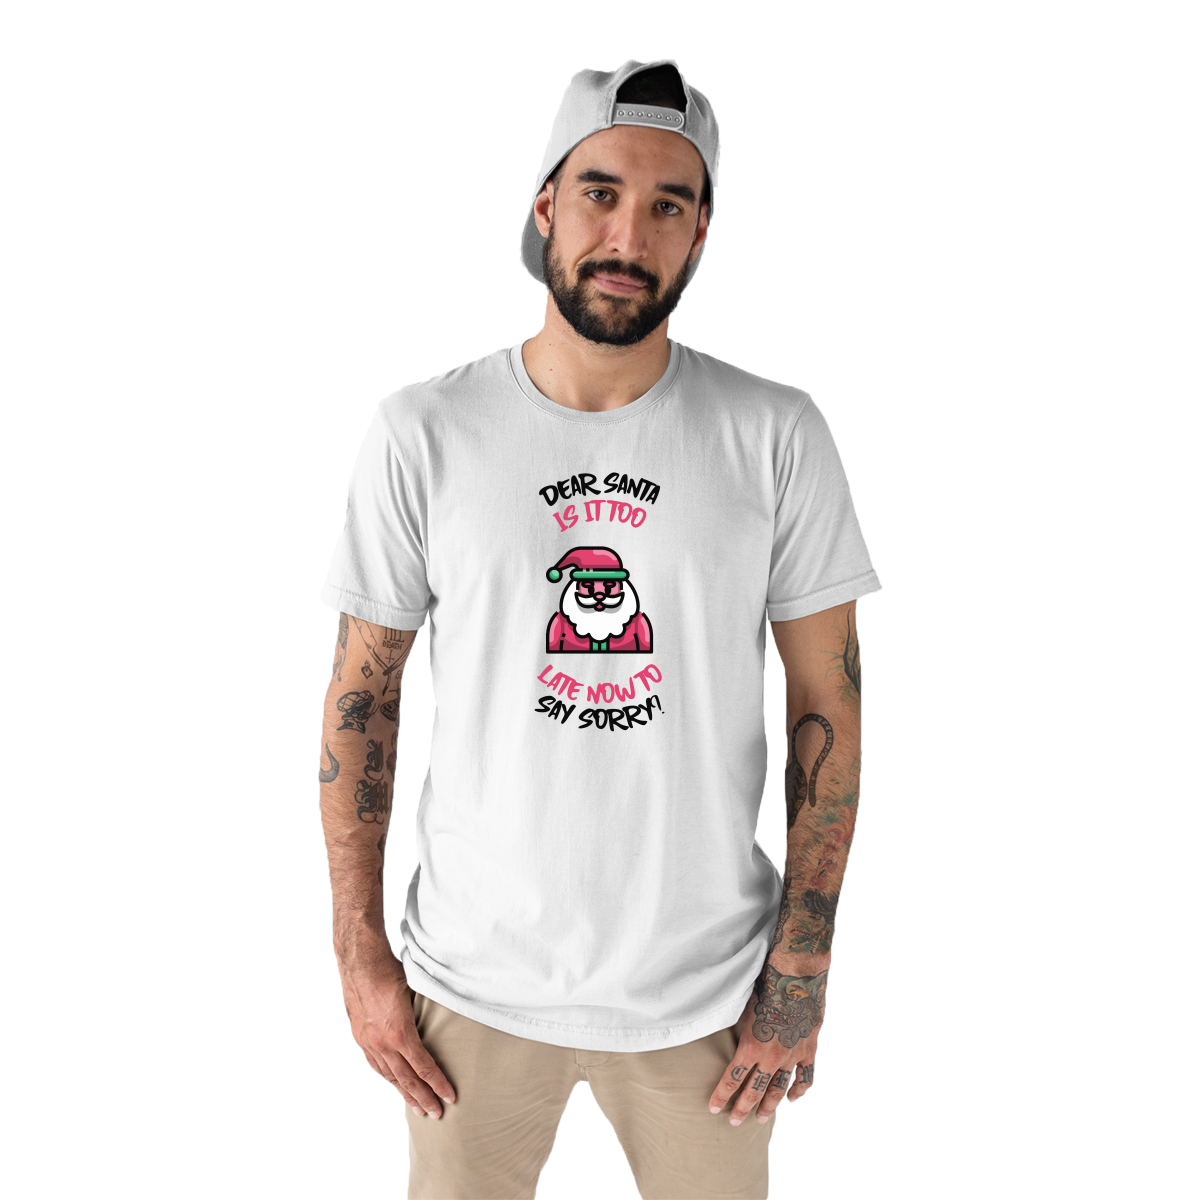 Dear Santa, Is It Too Late to Say Sorry? Men's T-shirt | White